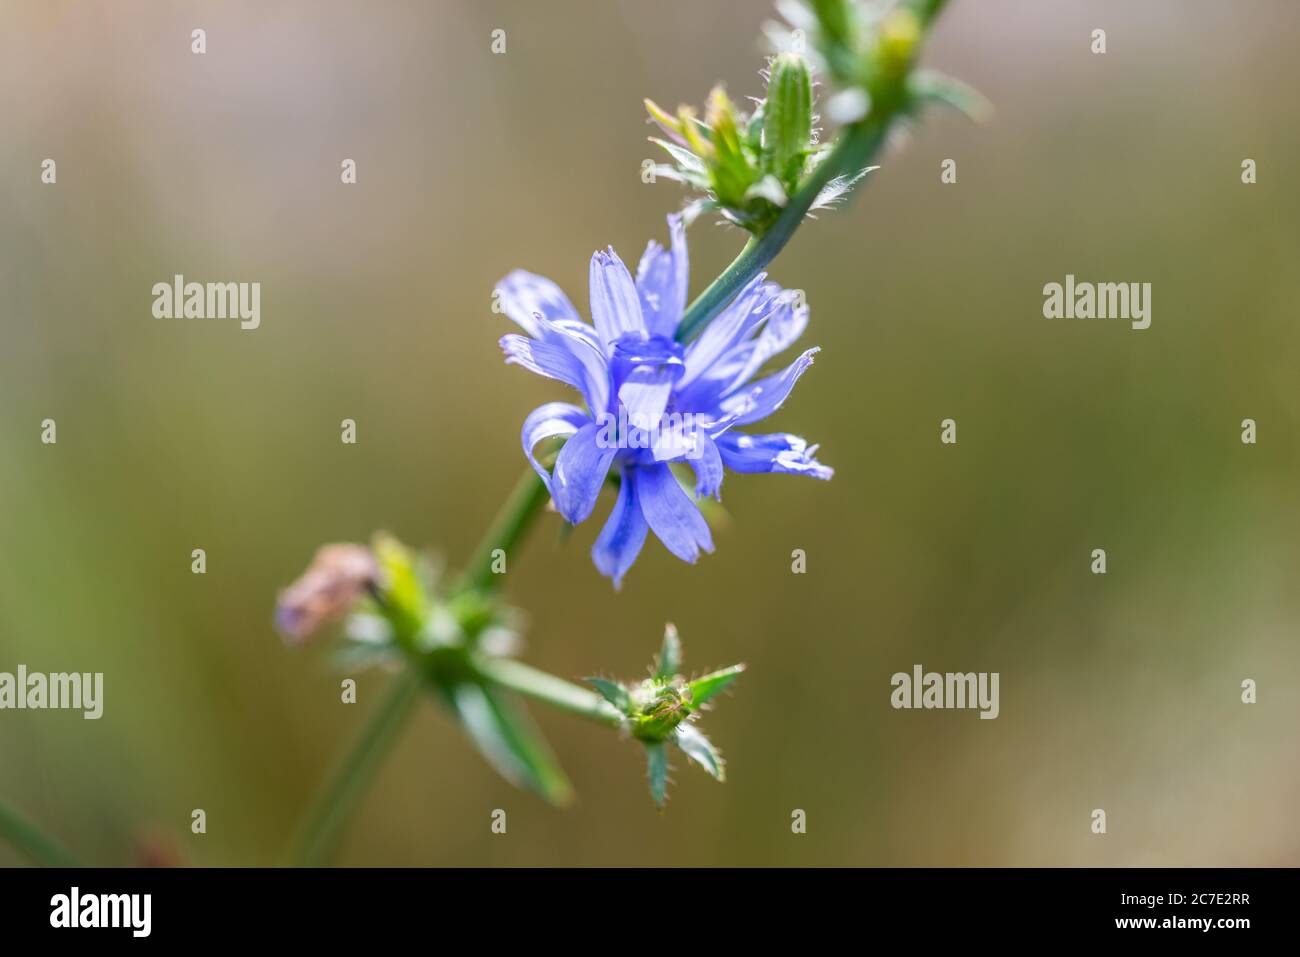 The blue flower of the Common chicory - Cichorium intybus - a wildflower growing on a meadow in Berlin during summer, Germany, Europe Stock Photo